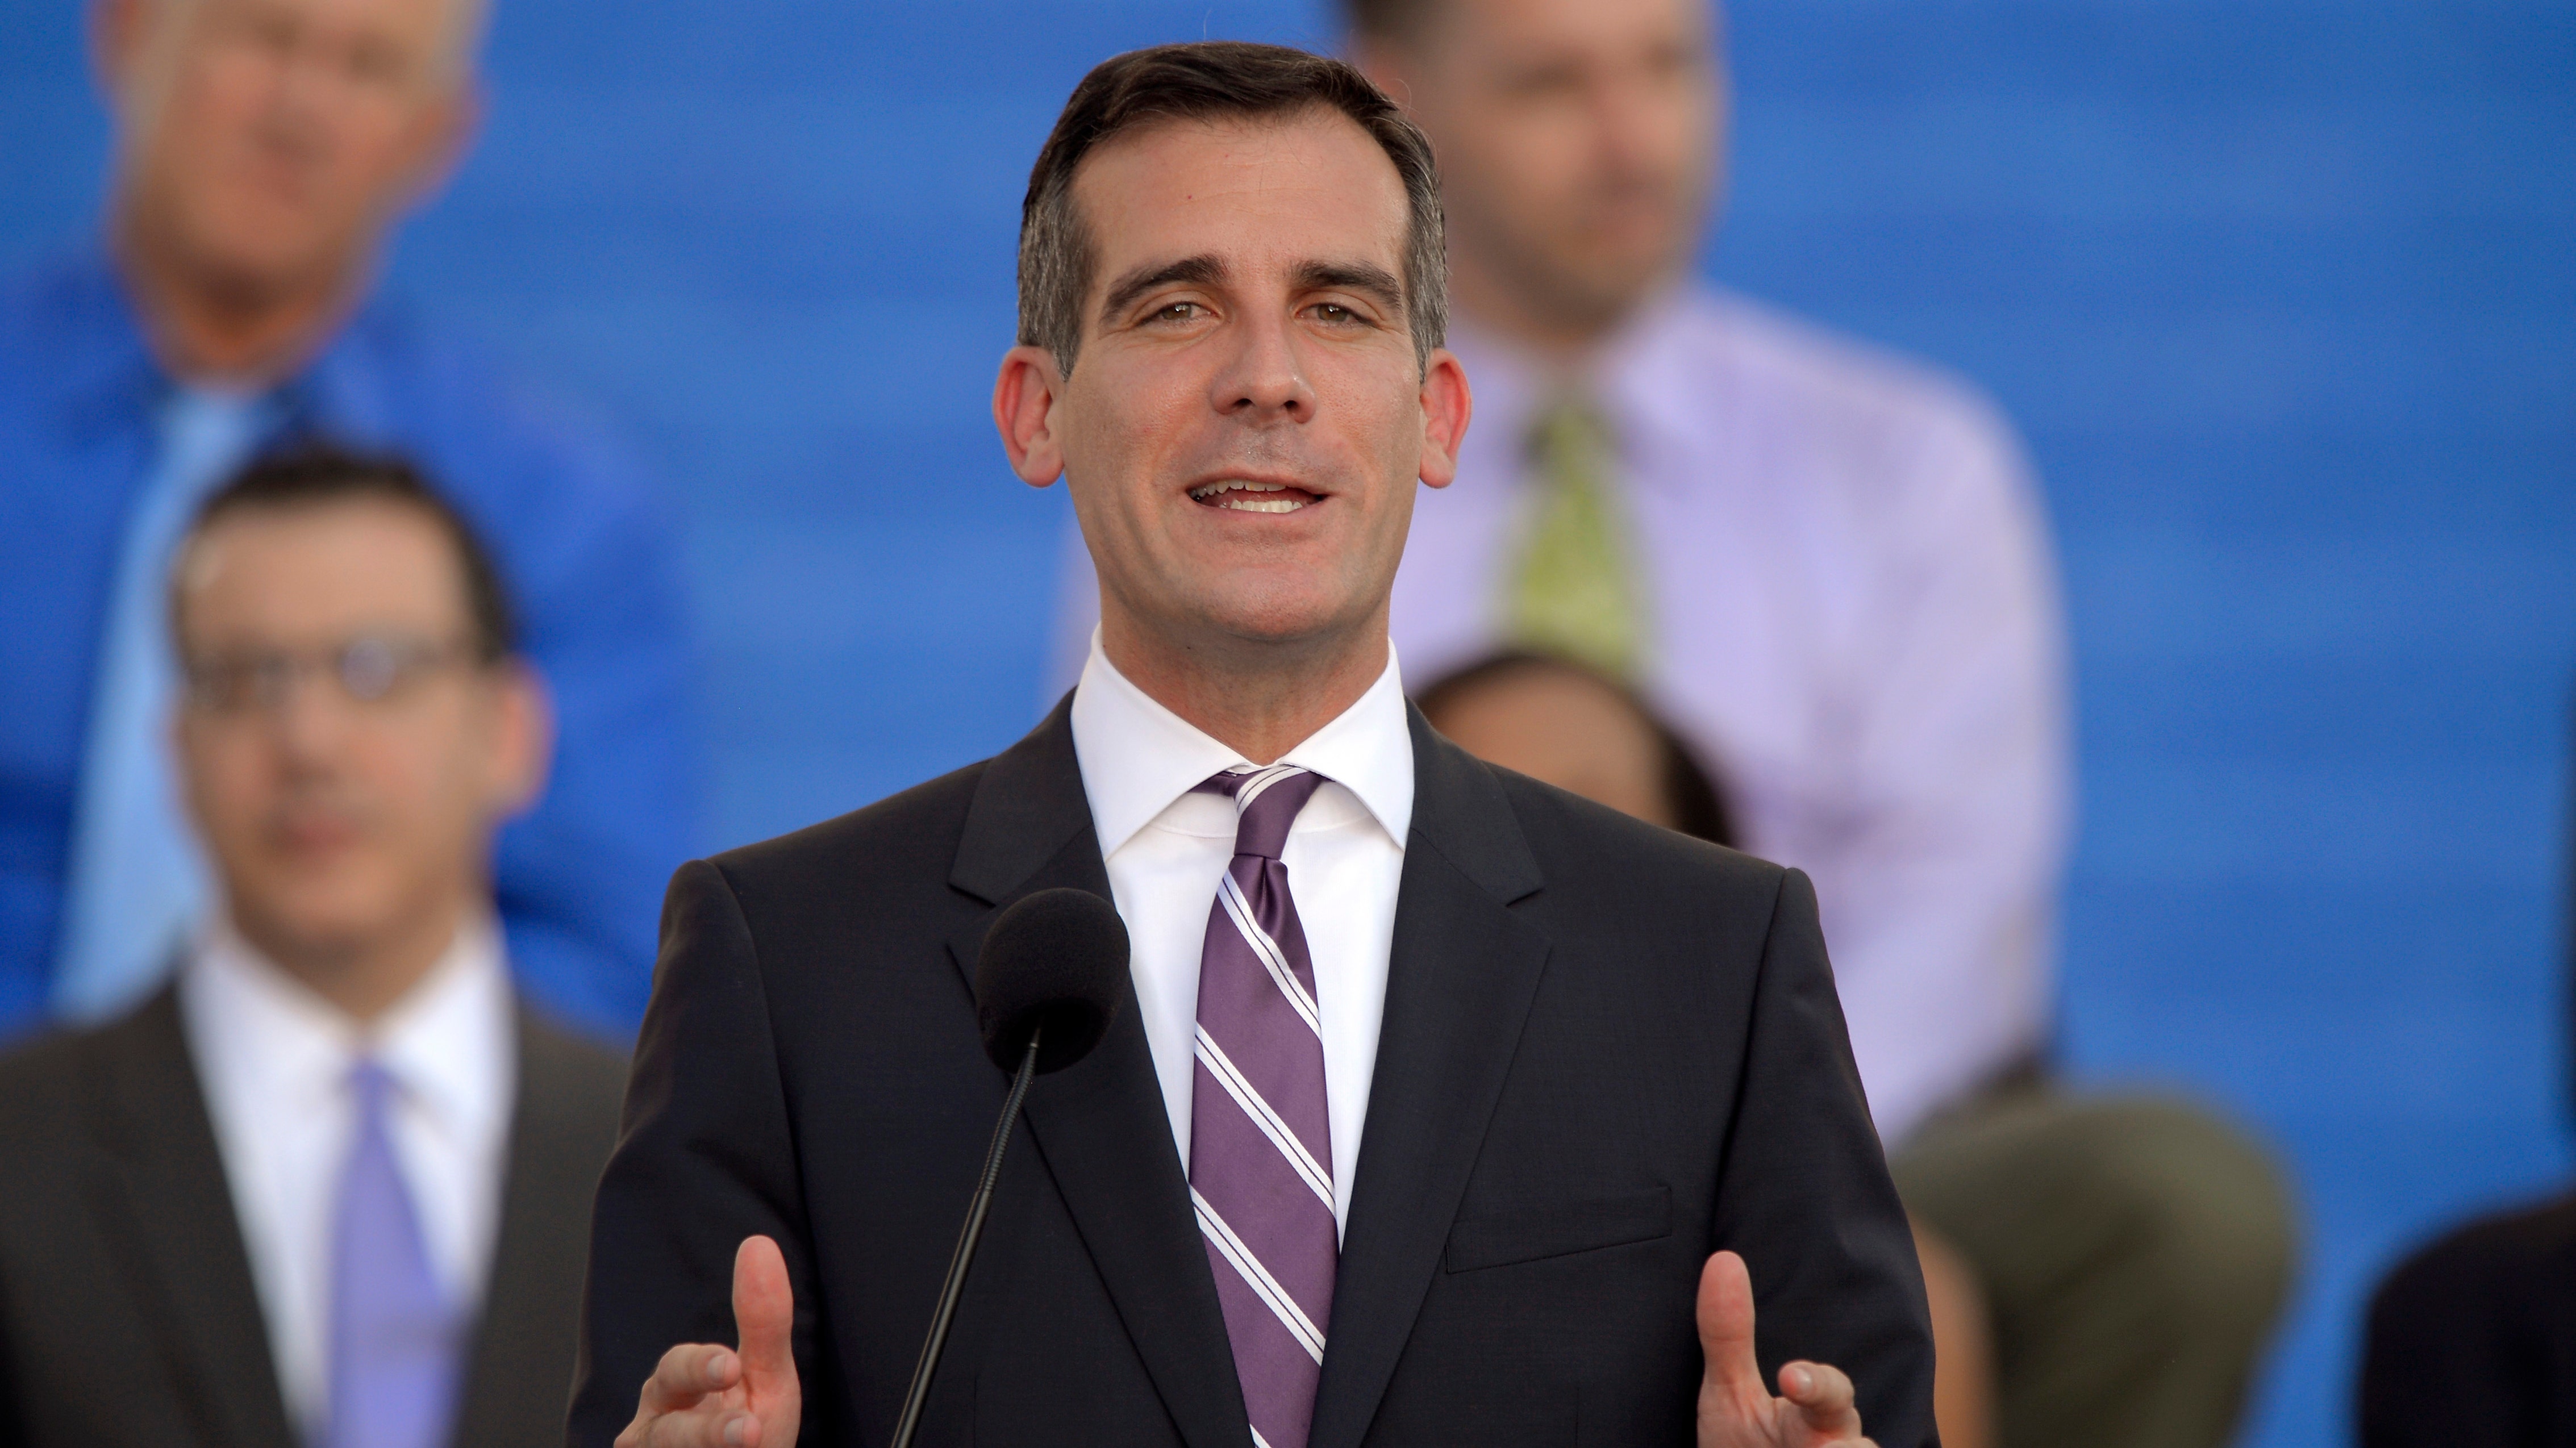 LA Mayor Garcetti calls for National Guard help: 'This is no longer a protest. This is destruction' - Fox News